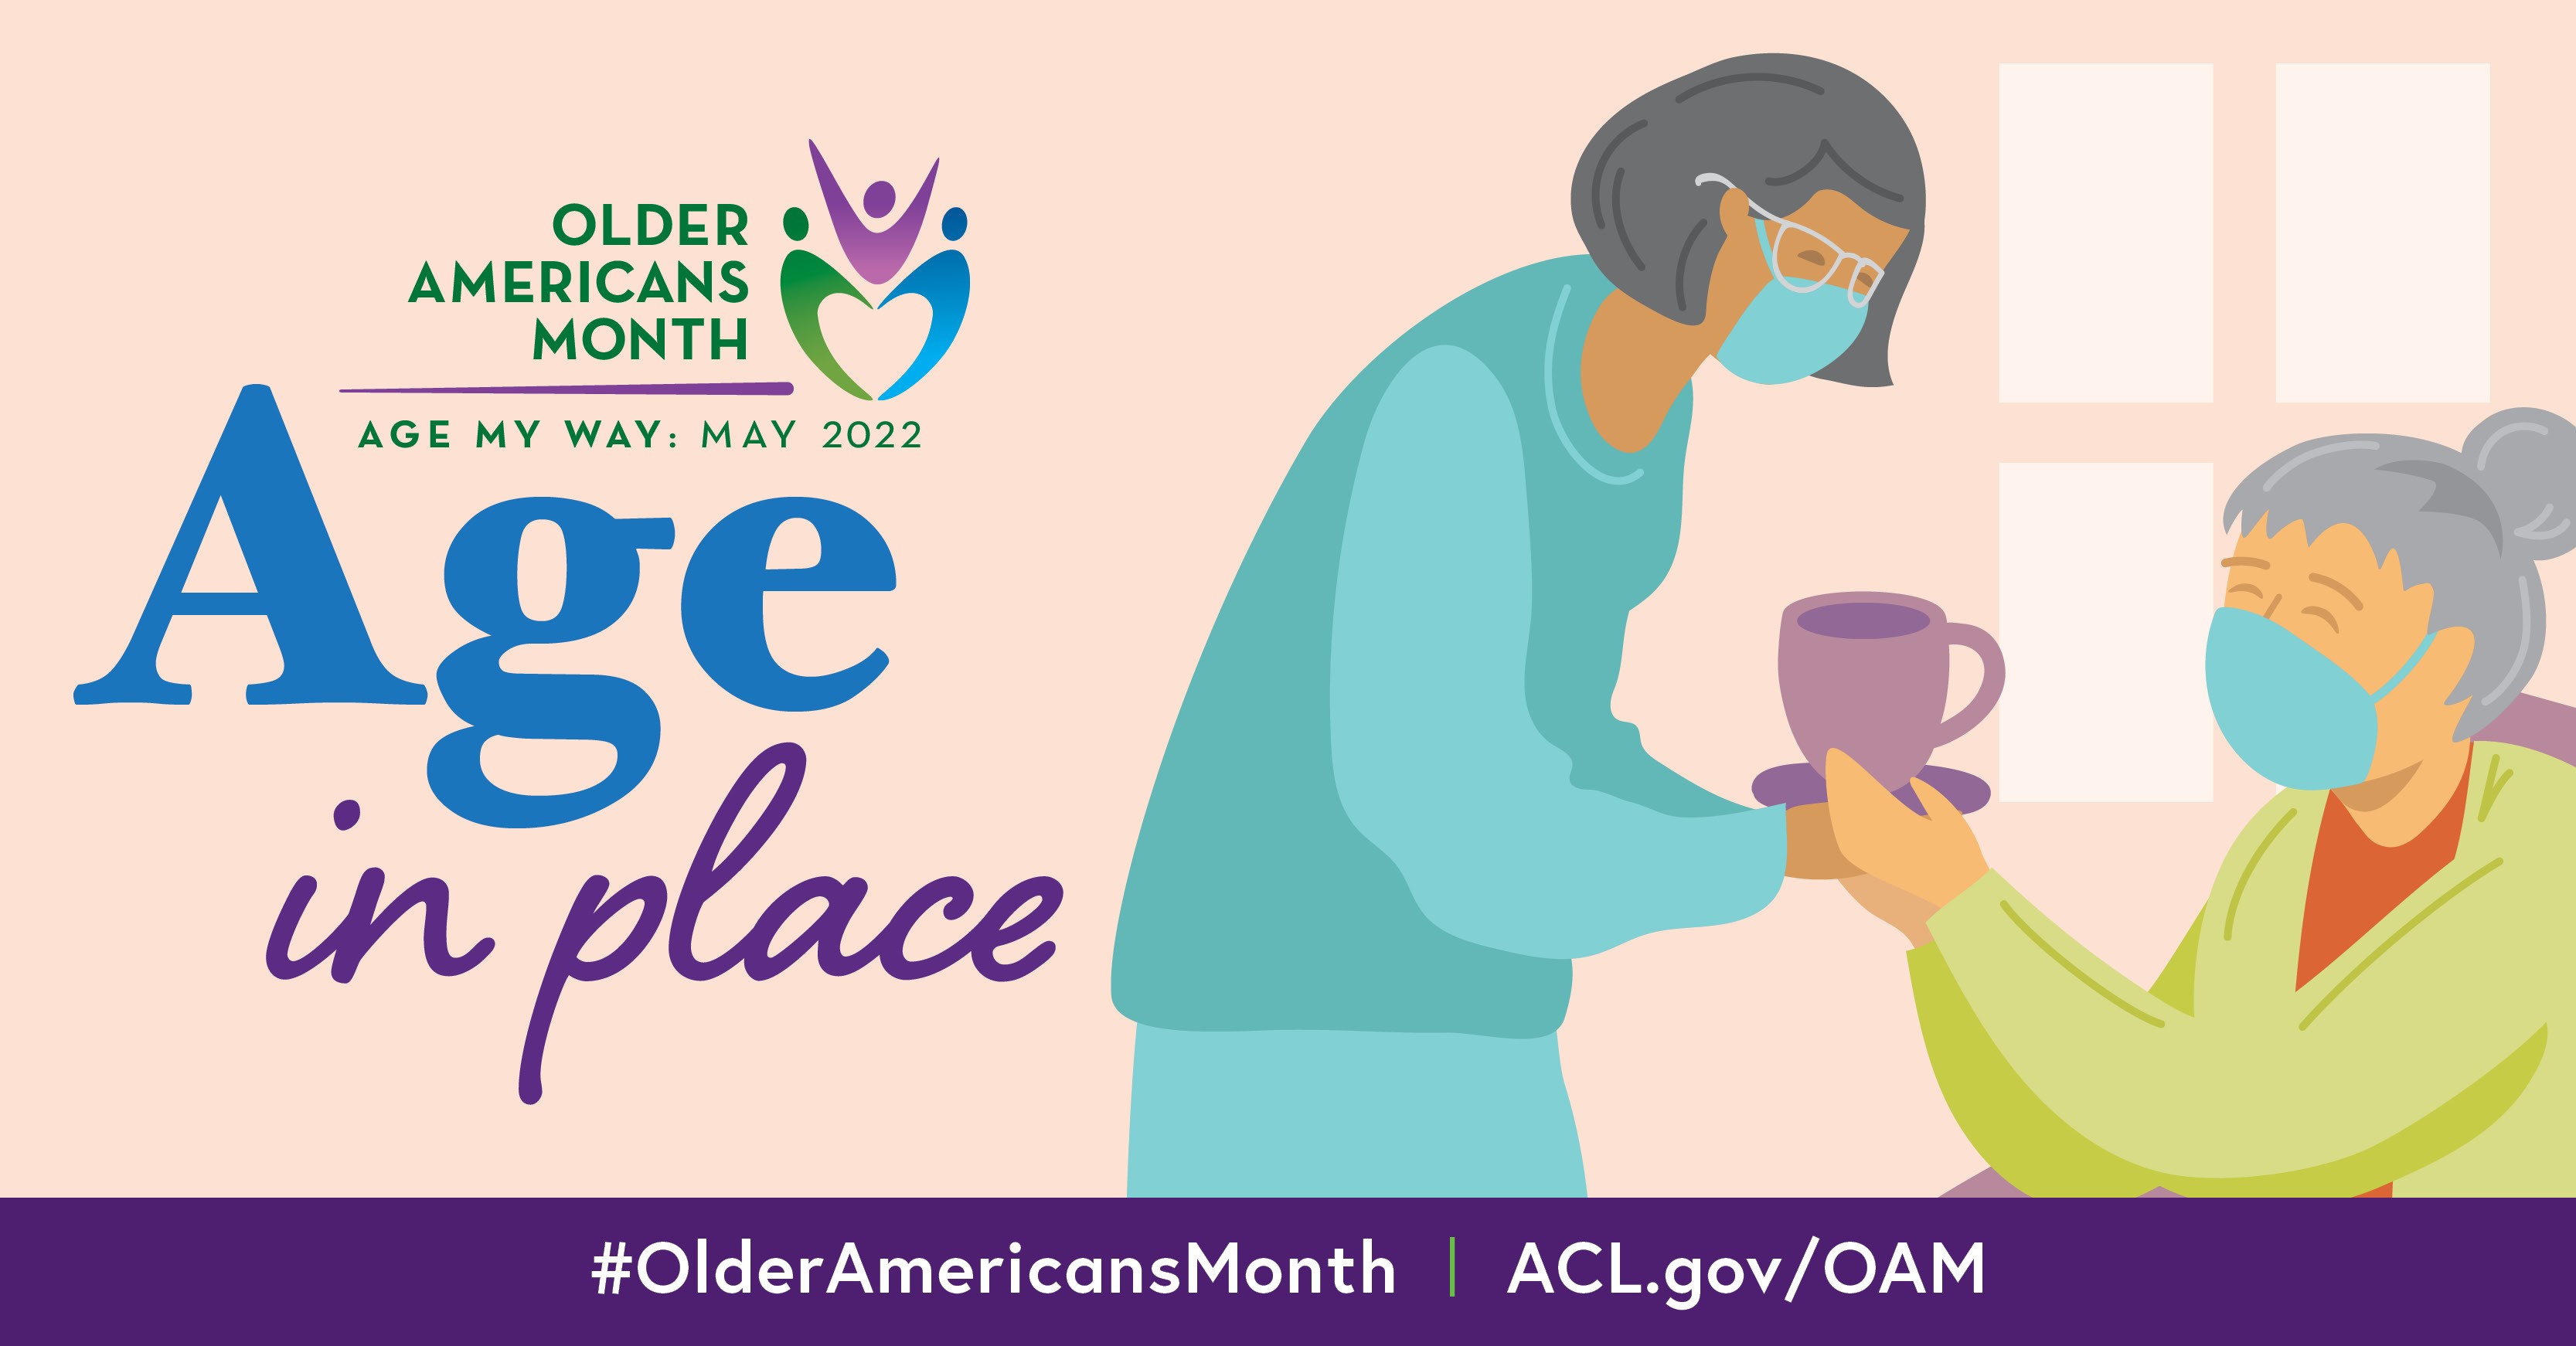 Older Americans Month, Age My Way: May 2022. Age in Place. #OlderAmericansMonth ACL.gov/OAM